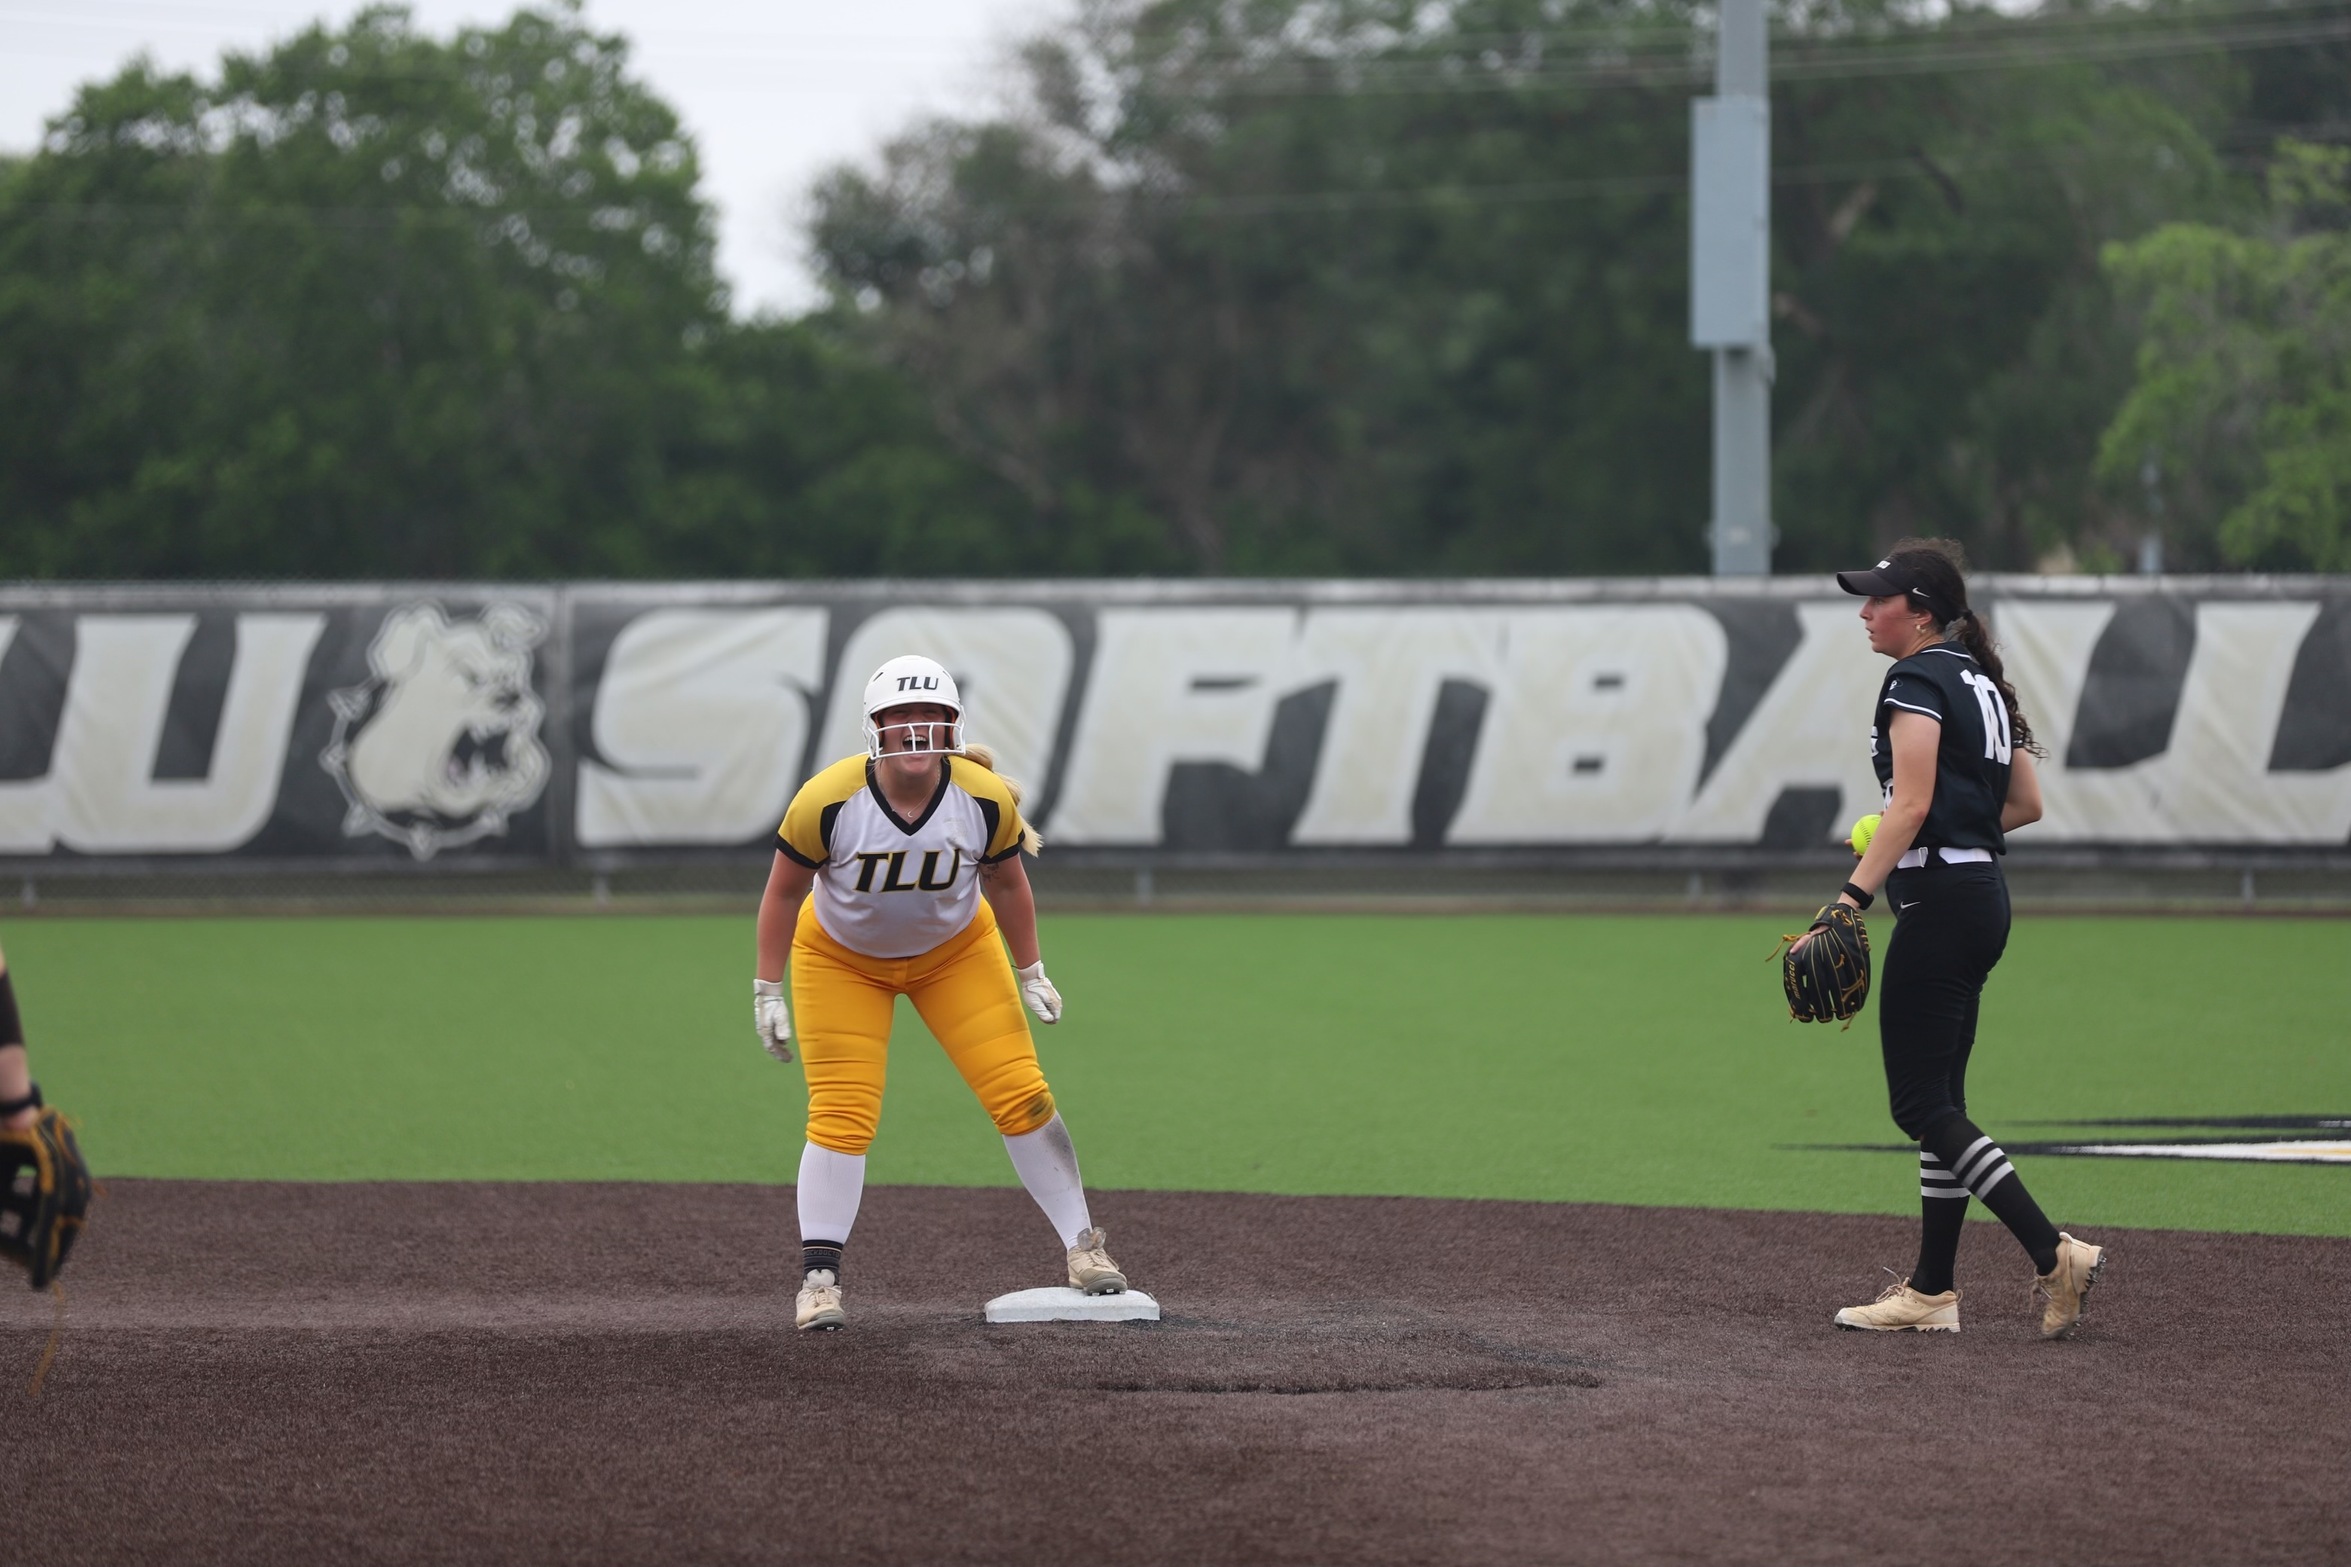 Kylee Jack celebrates after her RBI double (photo by Brylie Nedd '25)